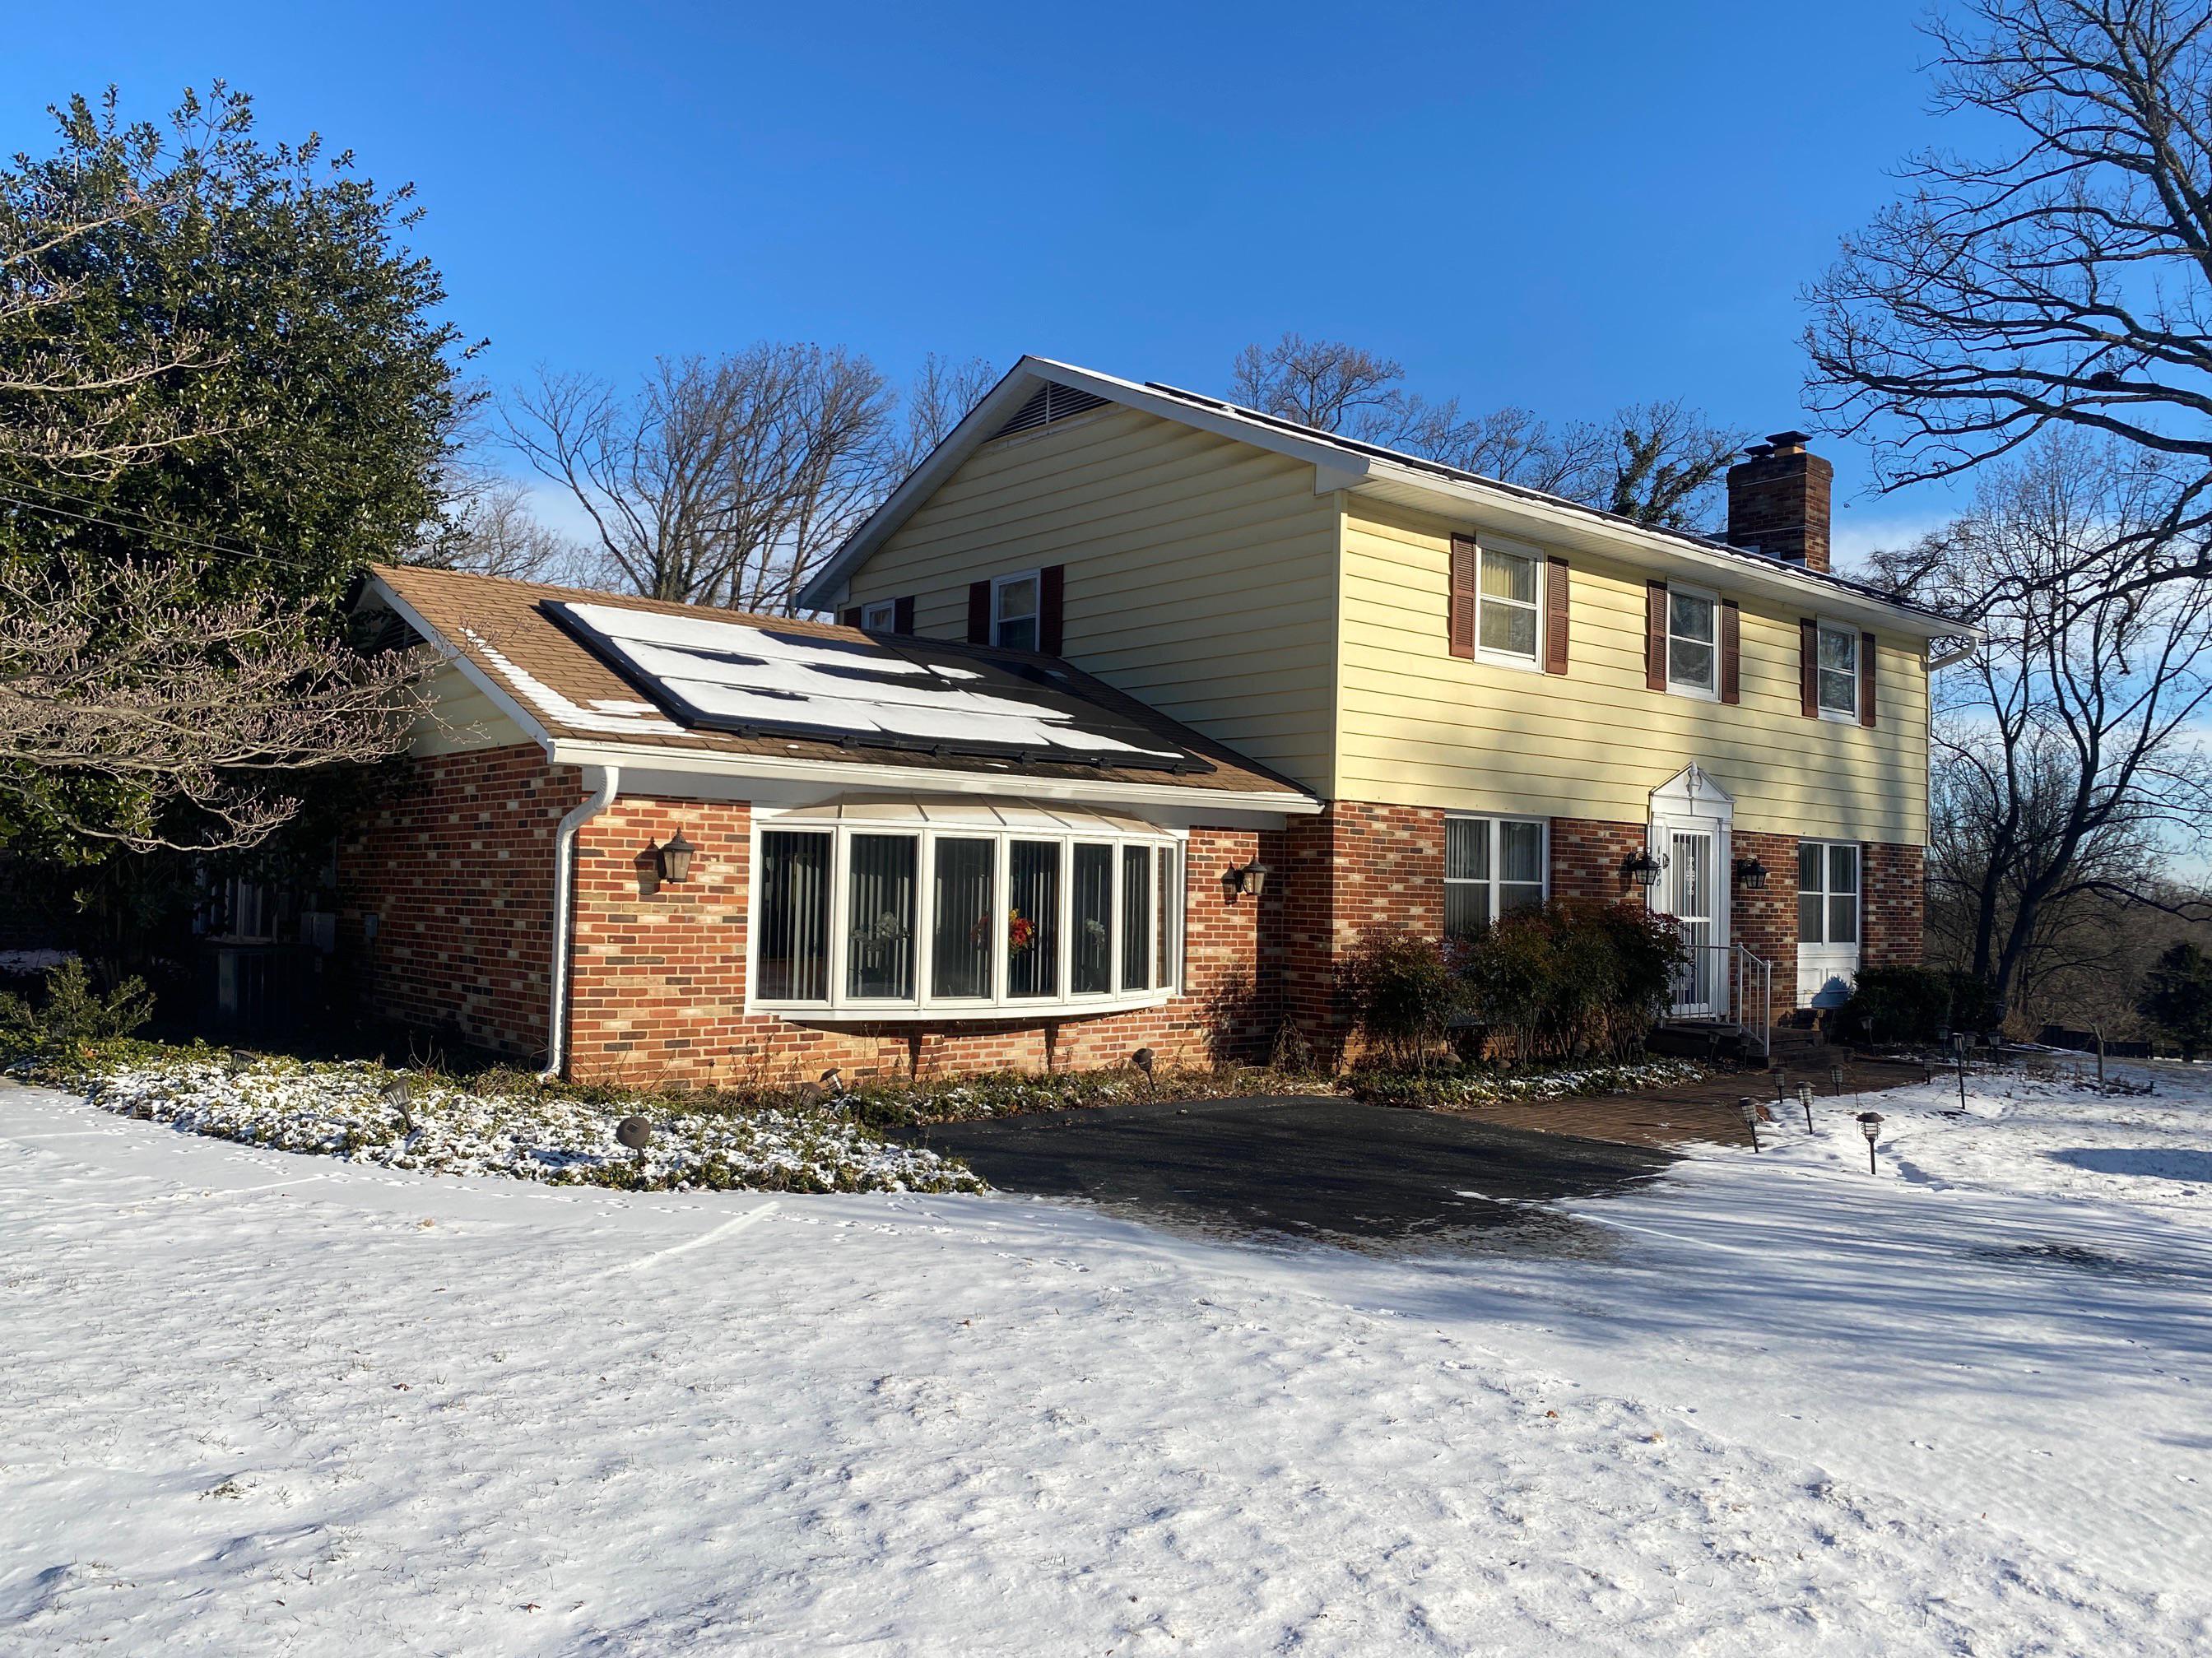 Fascia, siding, and roof inspection! Looking to remove the old aluminum siding and 3 tab shingles with a premium lifetime roofing and siding system!